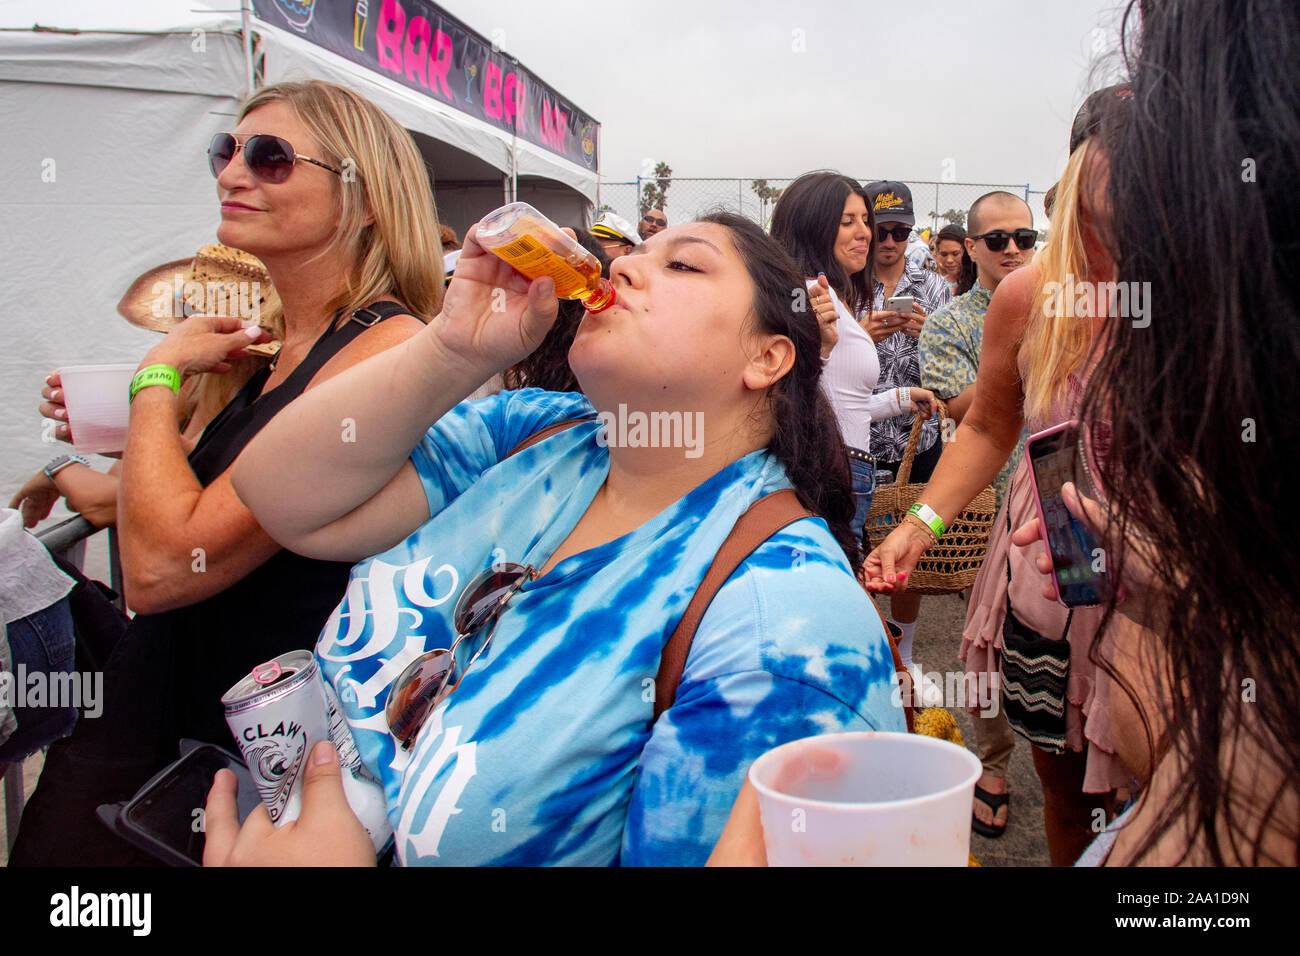 Waiting for an outdoor concert in Huntington Beach, CA, to begin, a lady in the audience drinks an anticipatory toast. Stock Photo